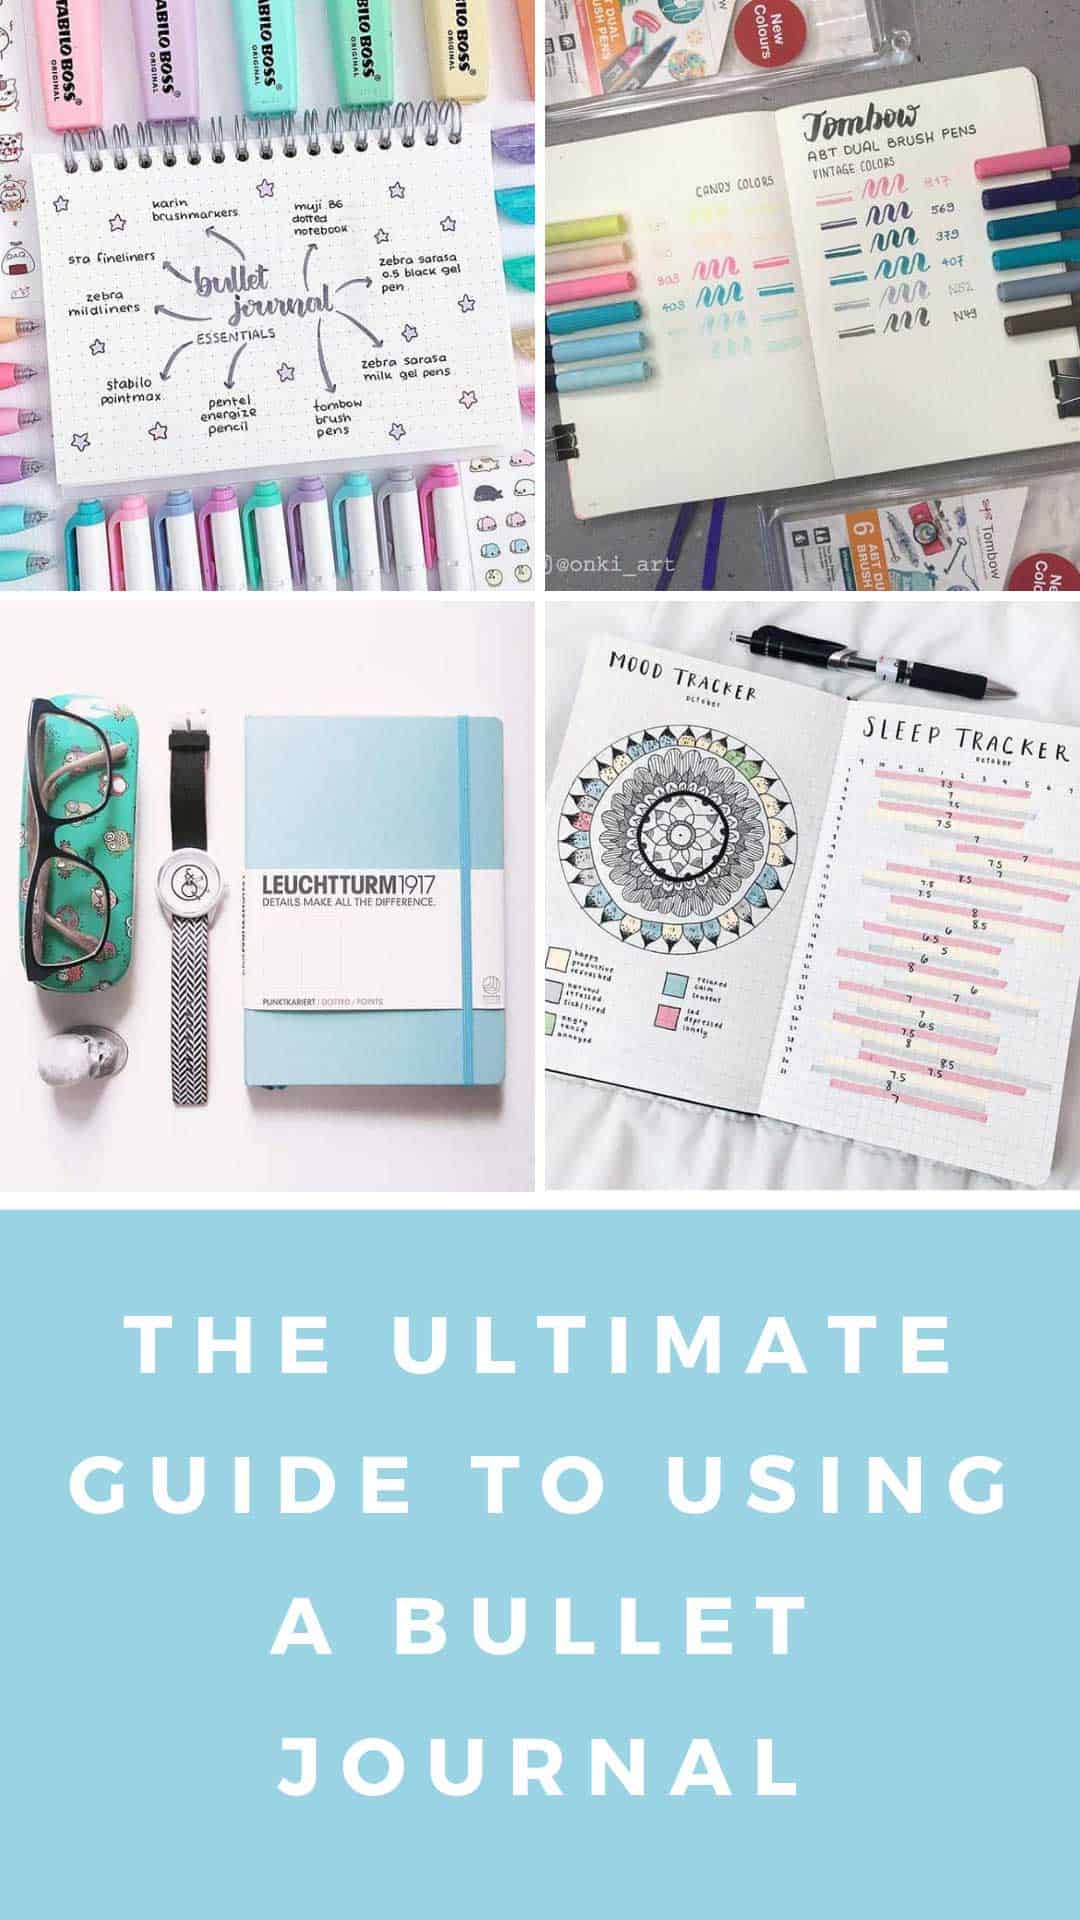 Wondering how to bullet journal? Check out this guide which will walk you through the set up step-by-step! So many great bullet journal ideas for beginners here! #bulletjournal